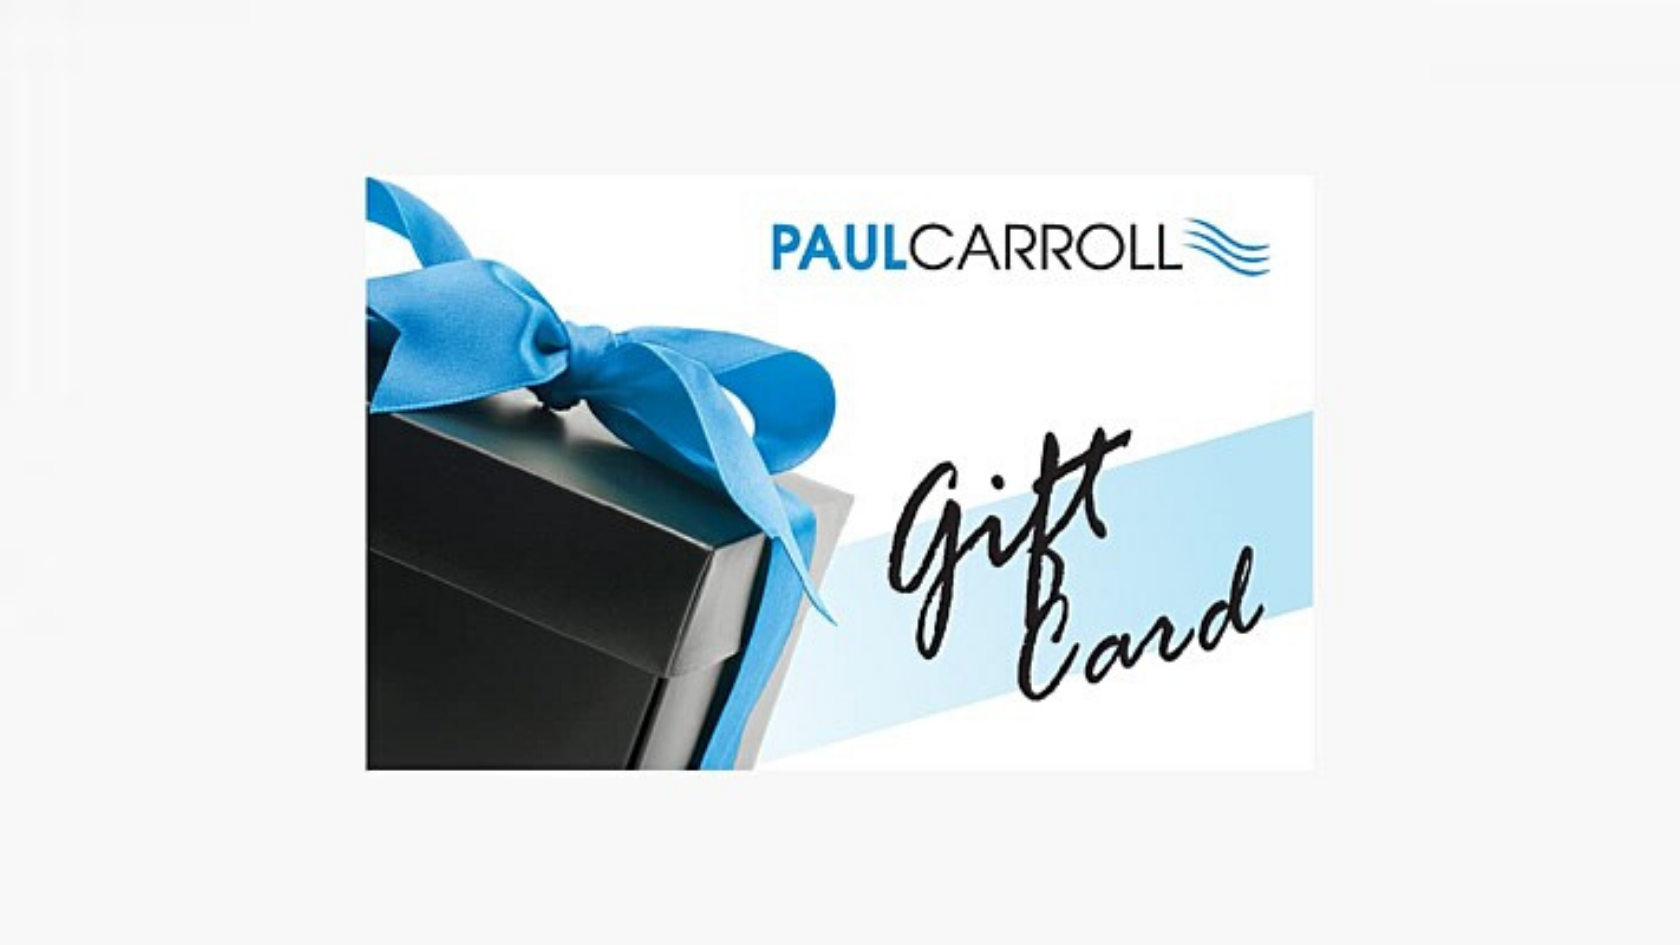 Paul Carroll Gift Card suspended against a neutral background